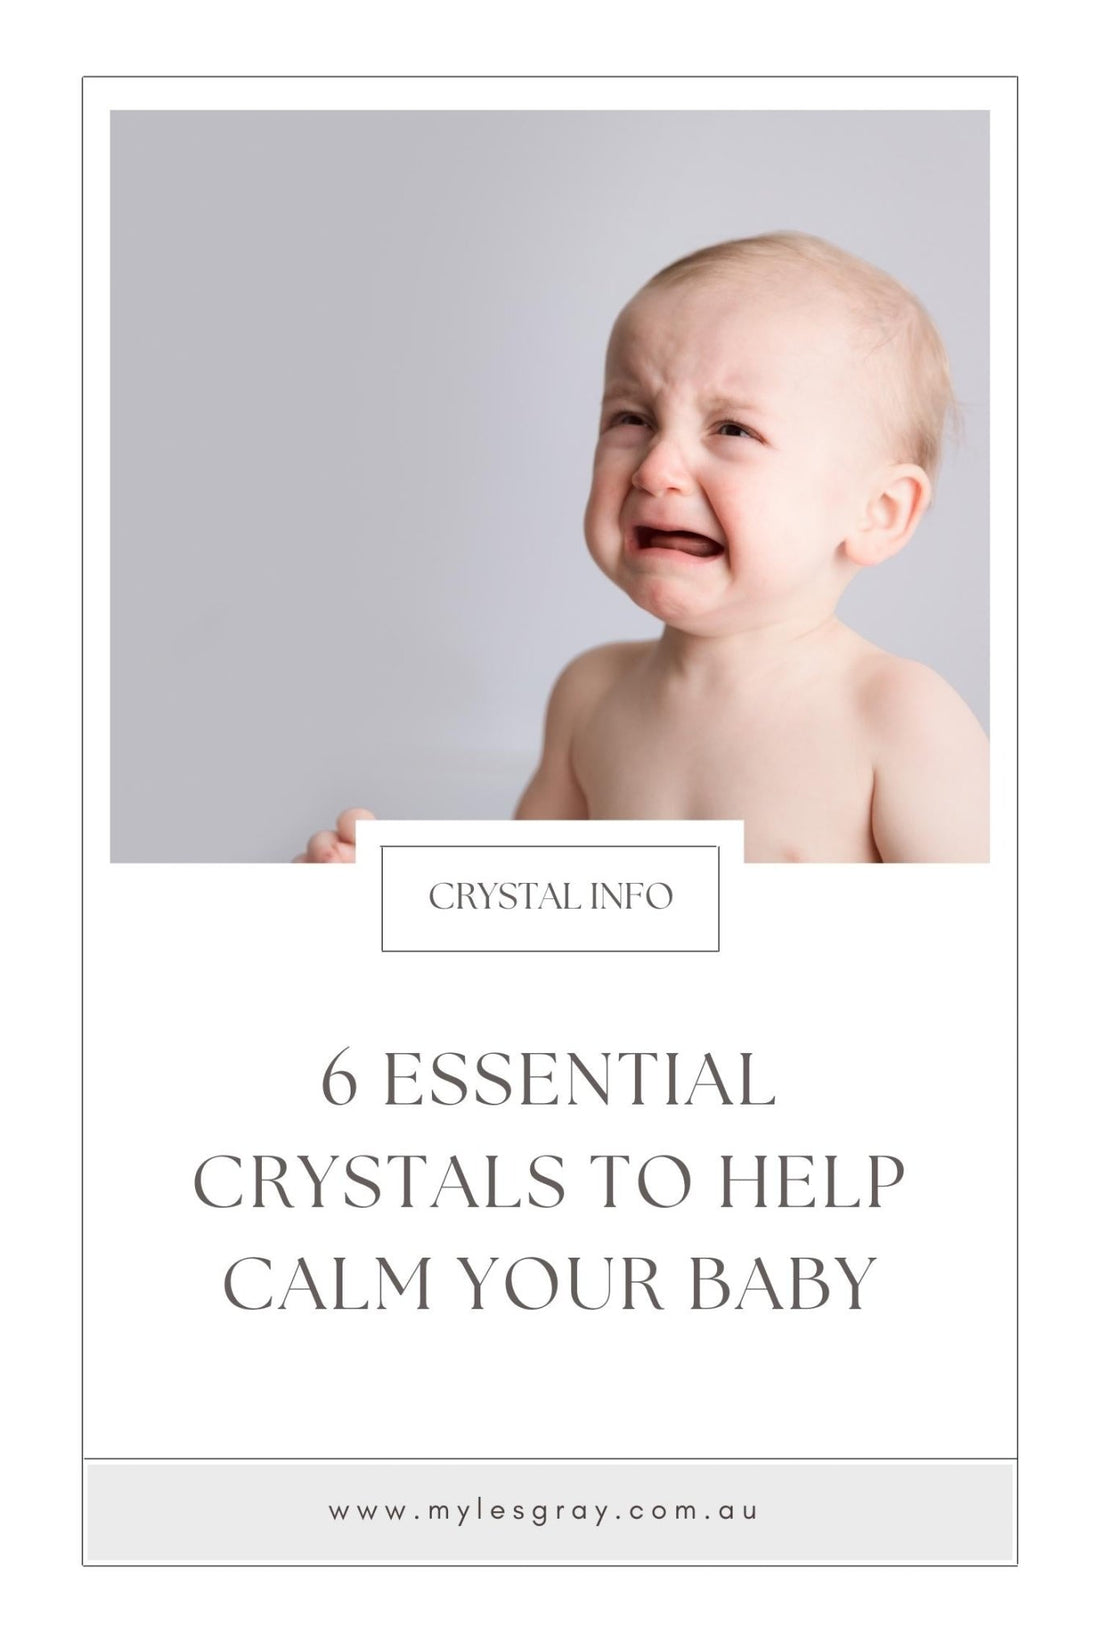 Crystal Healing | 6 essential crystals to calm your baby - Myles Gray